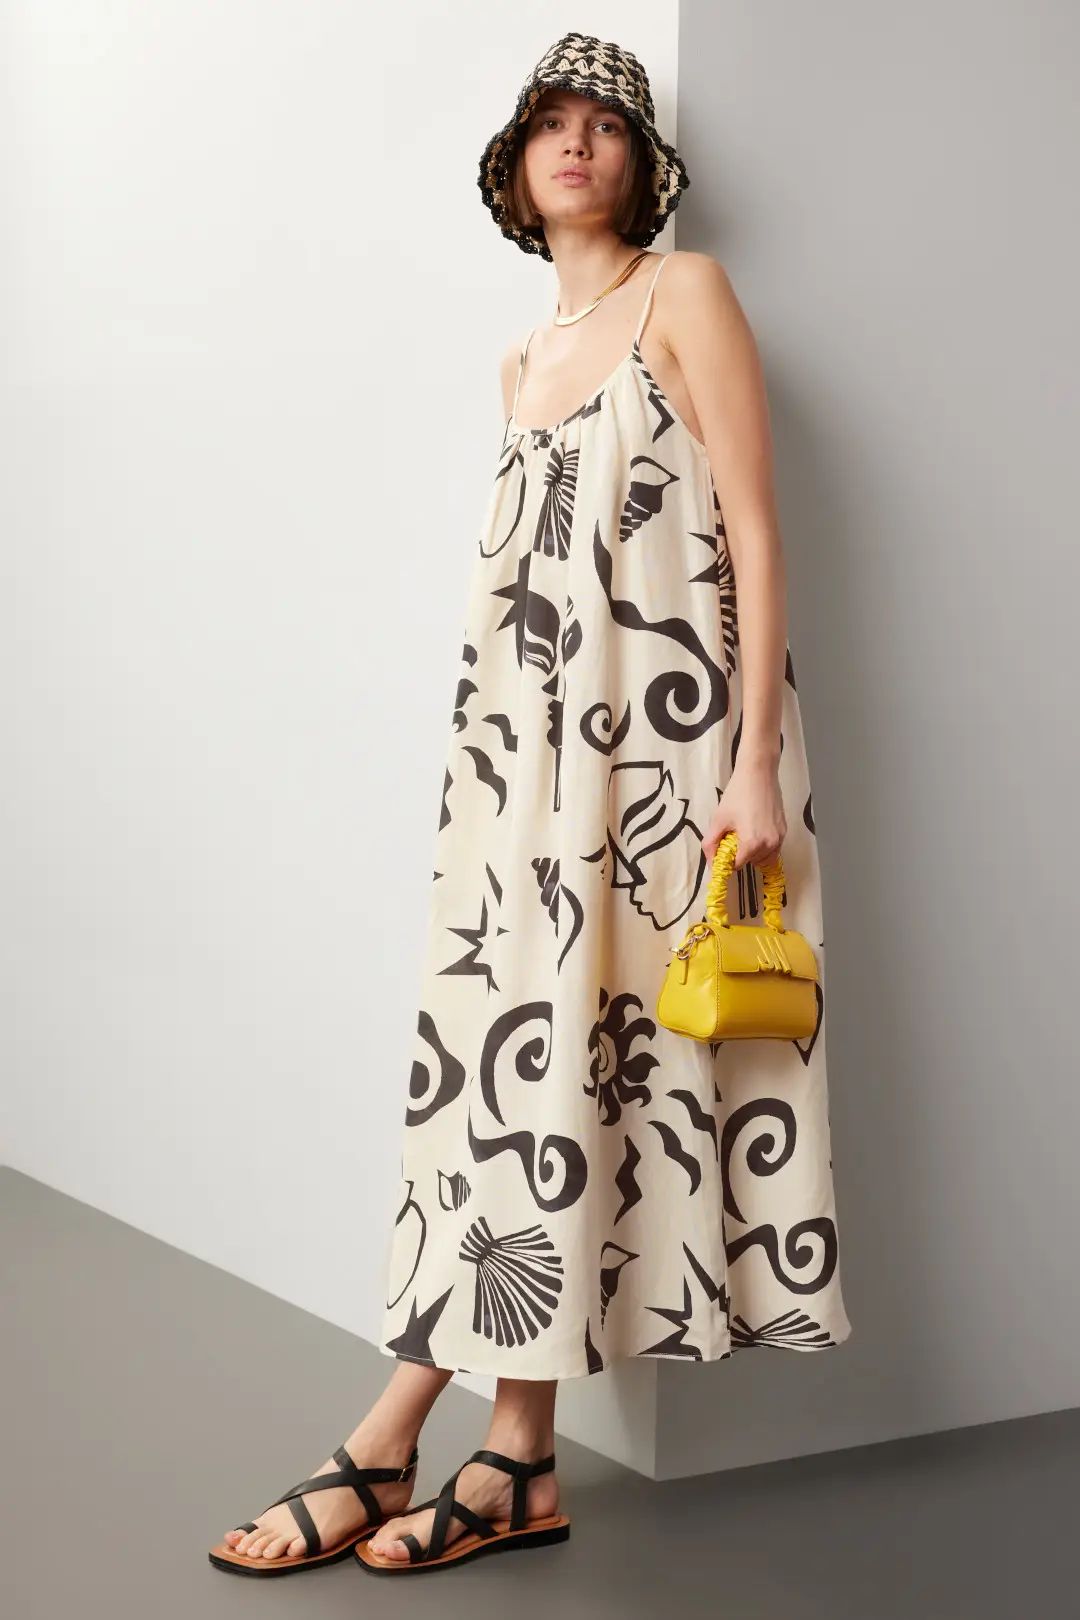 Untitled in Motion Ophelia Abstract Dress | Rent the Runway